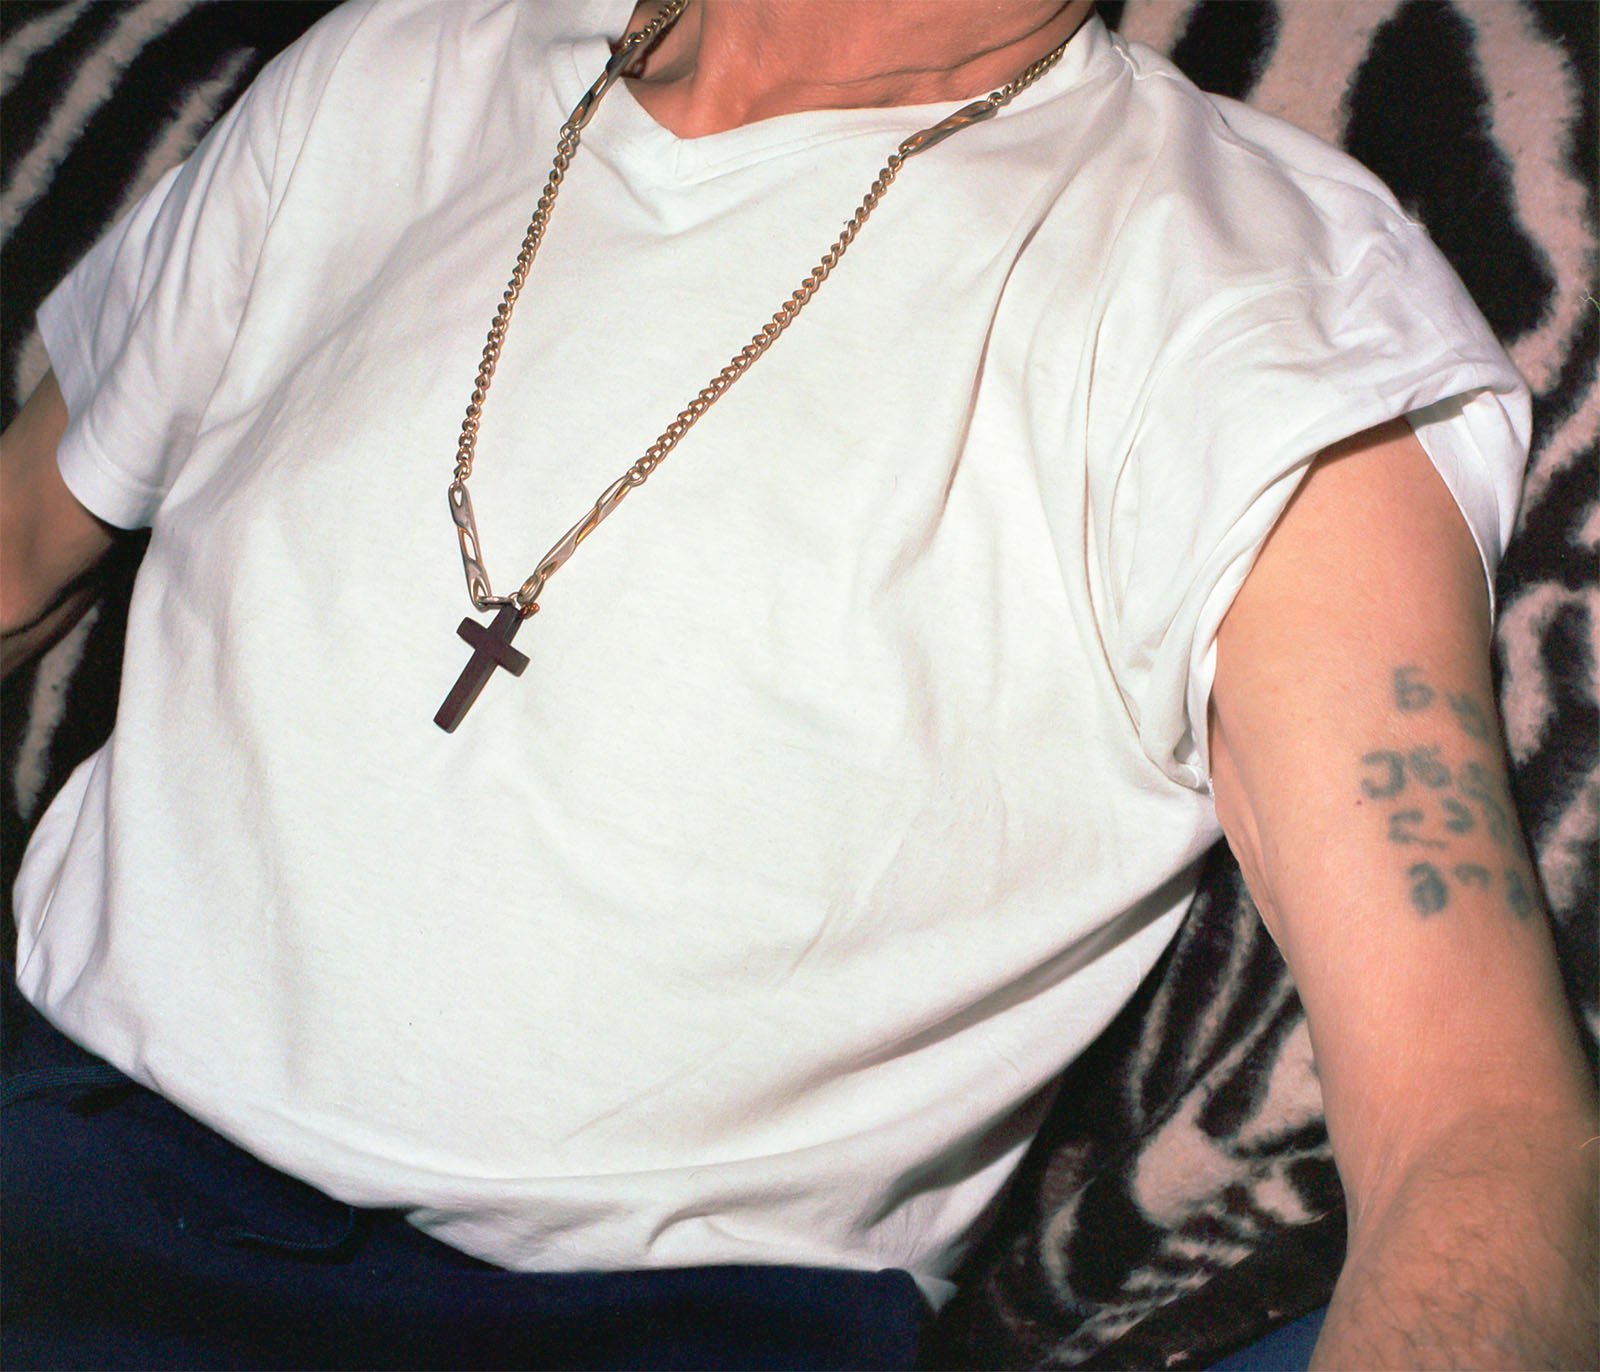 A close-up photo of a person wearing a plain white t-shirt with a golden chain and cross pendant. there's a visible tattoo with numbers on the forearm. the background features a leopard print fabric.